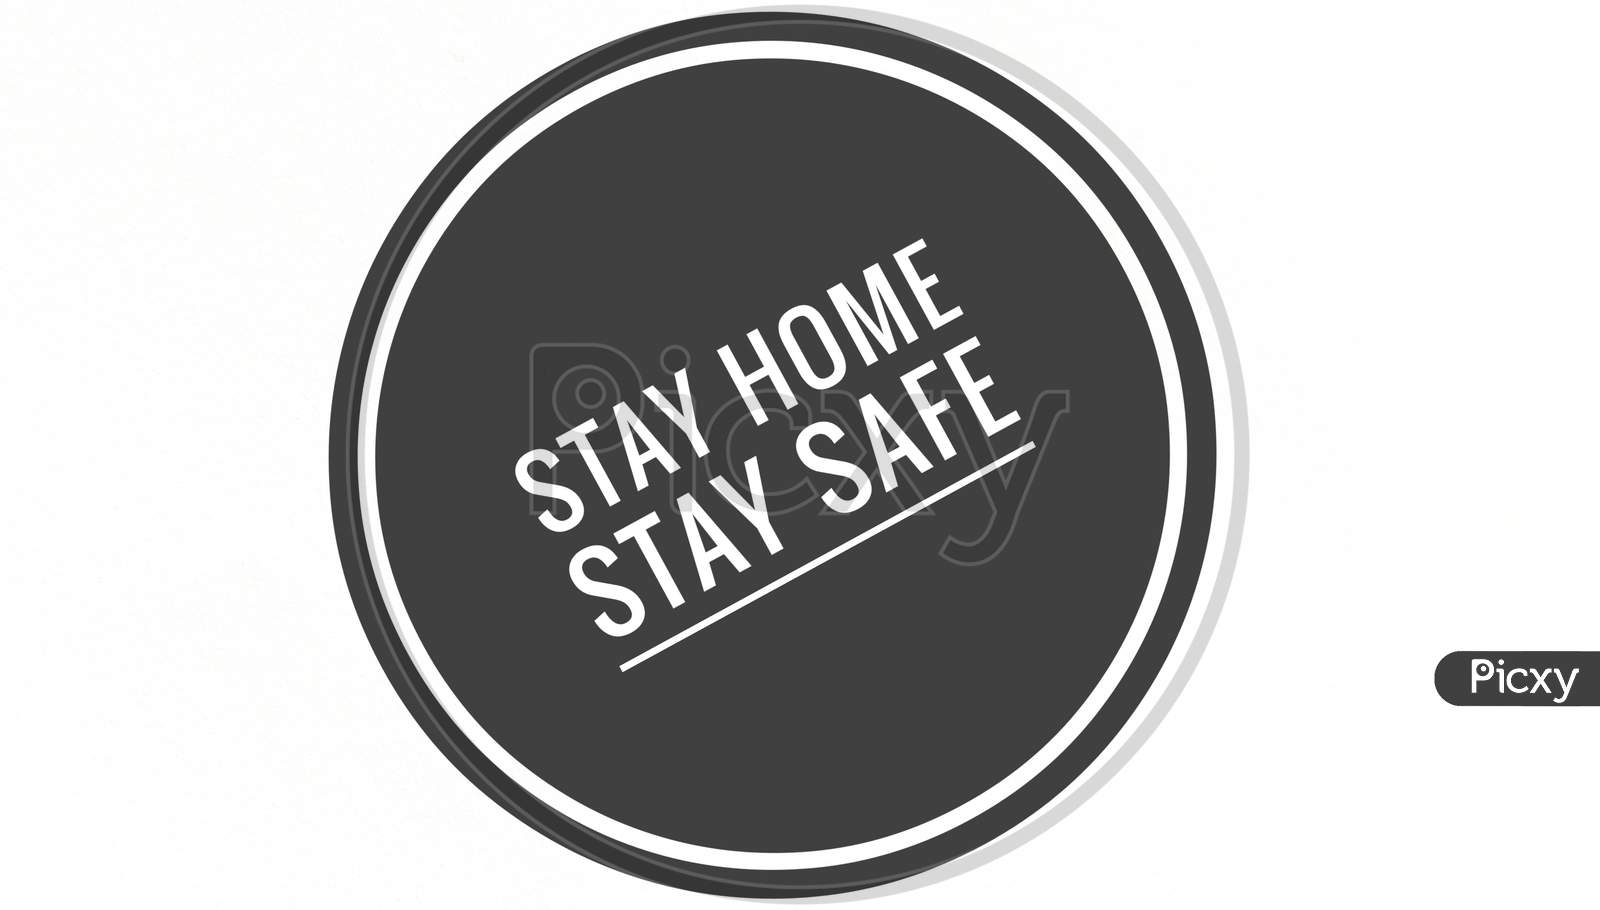 Stay home stay safe text words isolated with white background copy space for text, home isolation for pandemic situation of corona virus infection of covid19